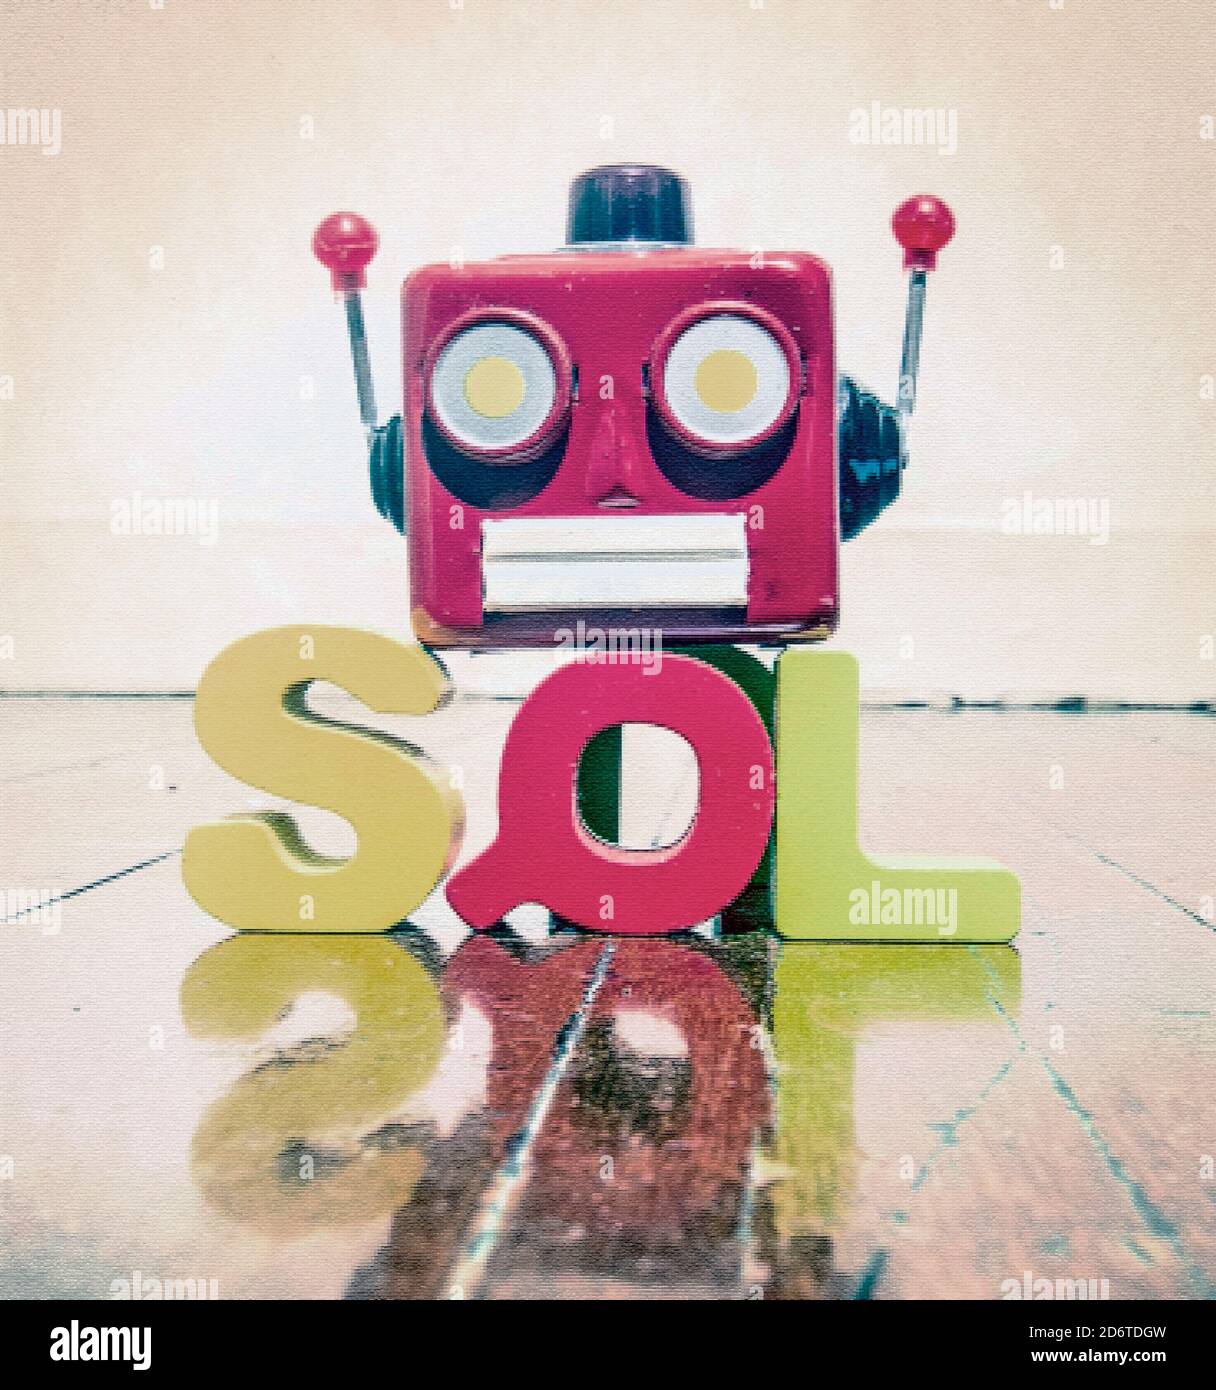 the acronym SQL with a robot head  on a wooden floor with reflection Stock Photo